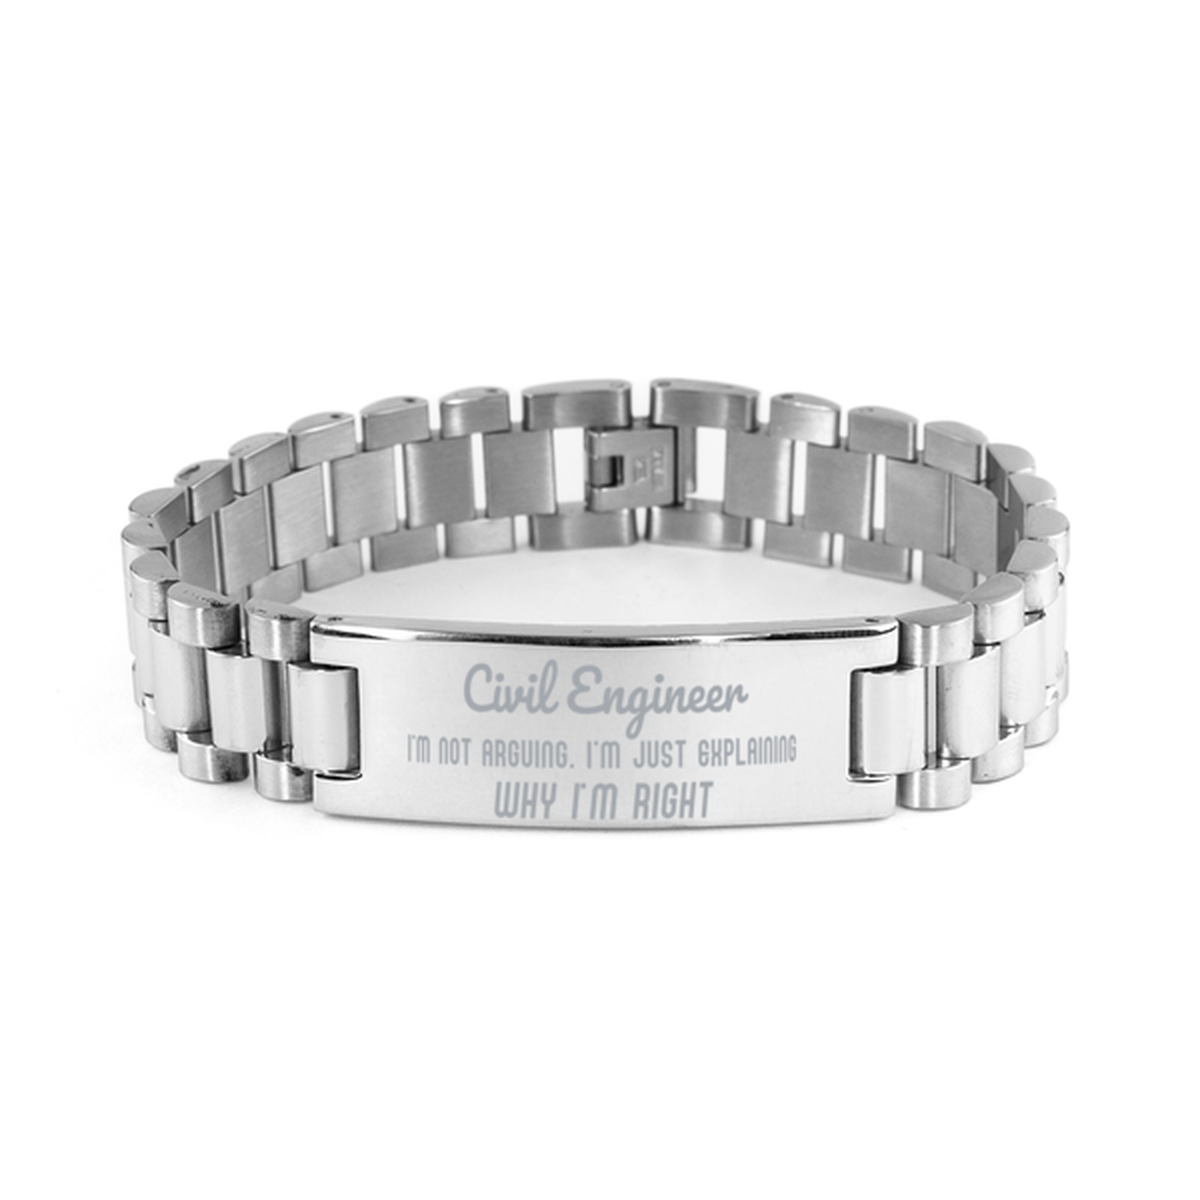 Civil Engineer I'm not Arguing. I'm Just Explaining Why I'm RIGHT Ladder Stainless Steel Bracelet, Graduation Birthday Christmas Civil Engineer Gifts For Civil Engineer Funny Saying Quote Present for Men Women Coworker